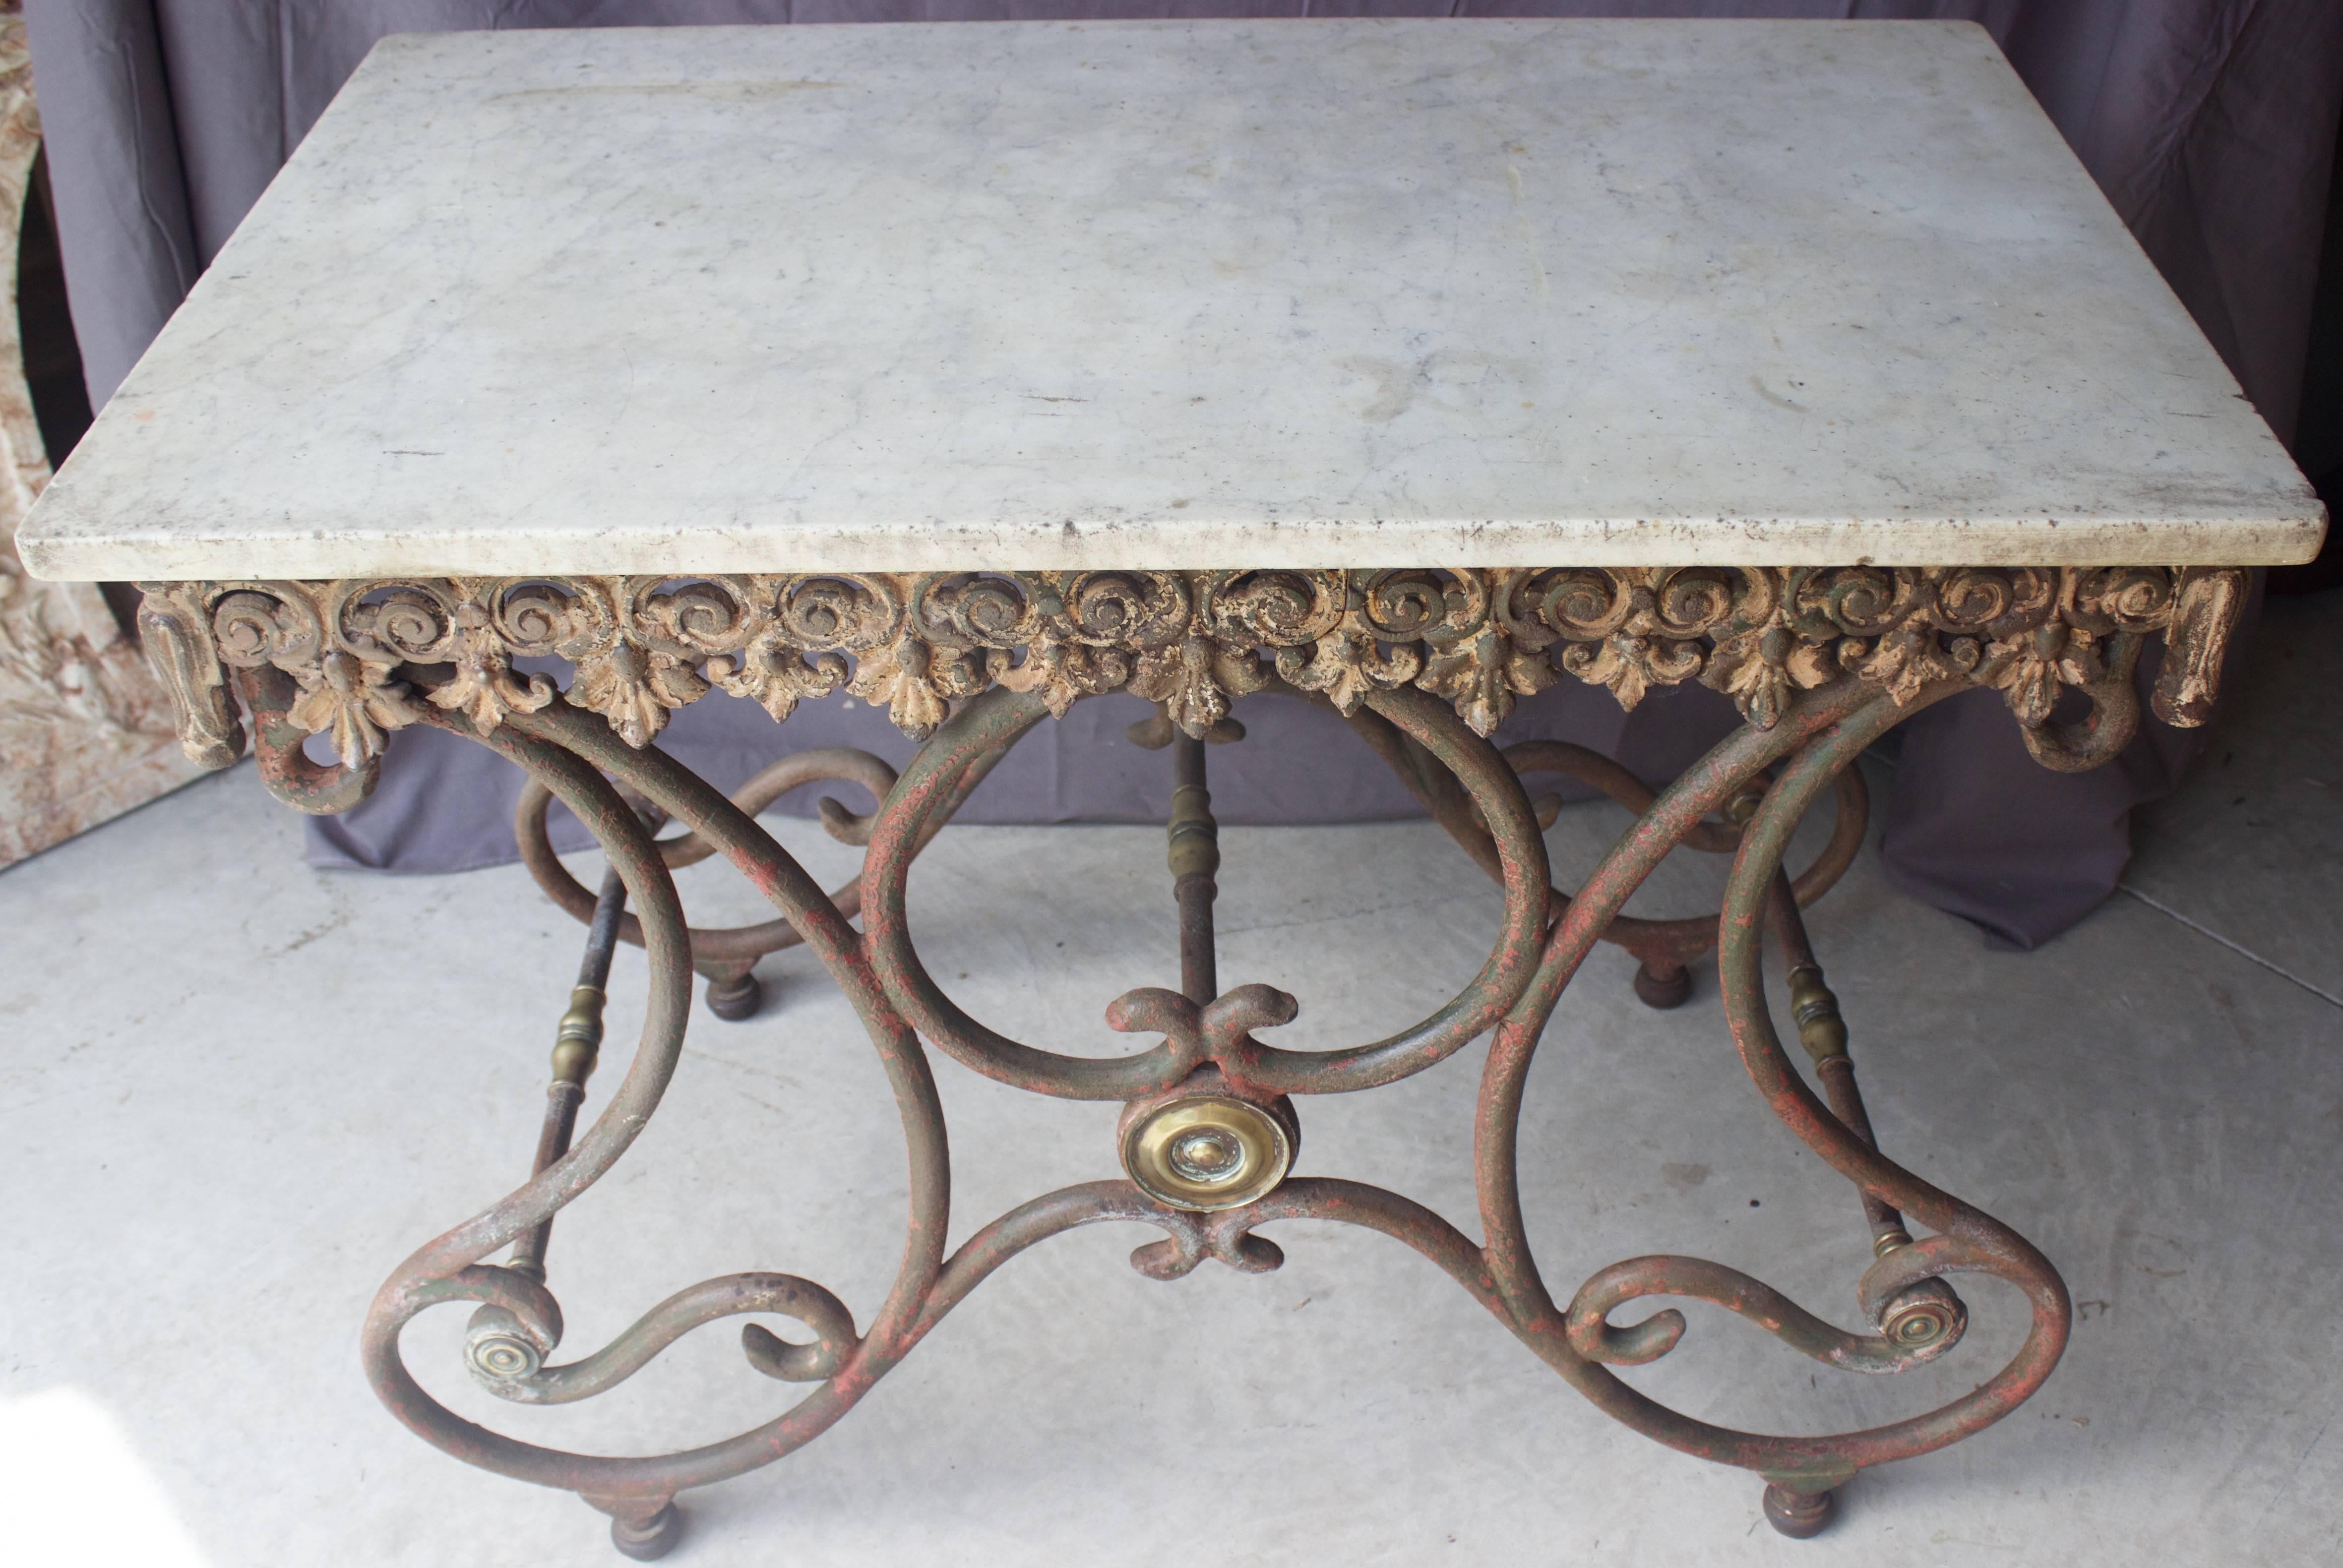 Napoleon III, rare and attractive French butcher table from the mid-19th century. Scrolled forged iron legs highlighted by brass finials and turnings on each of the three crossbars. Nice cast iron frieze Decor on three sides to enhance the one inch